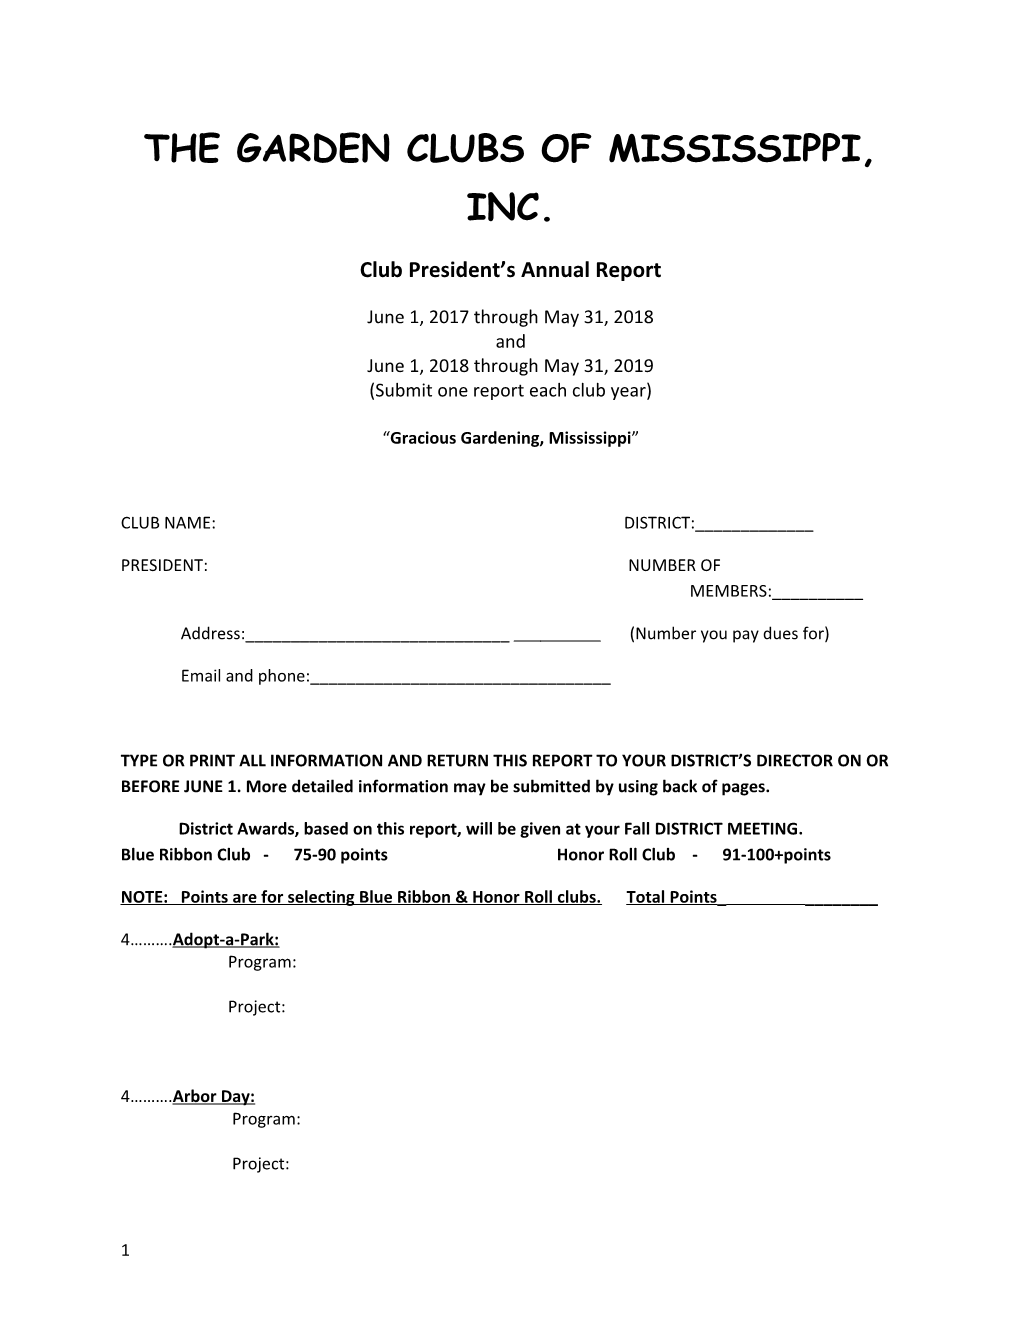 The Garden Clubs of Mississippi, Inc